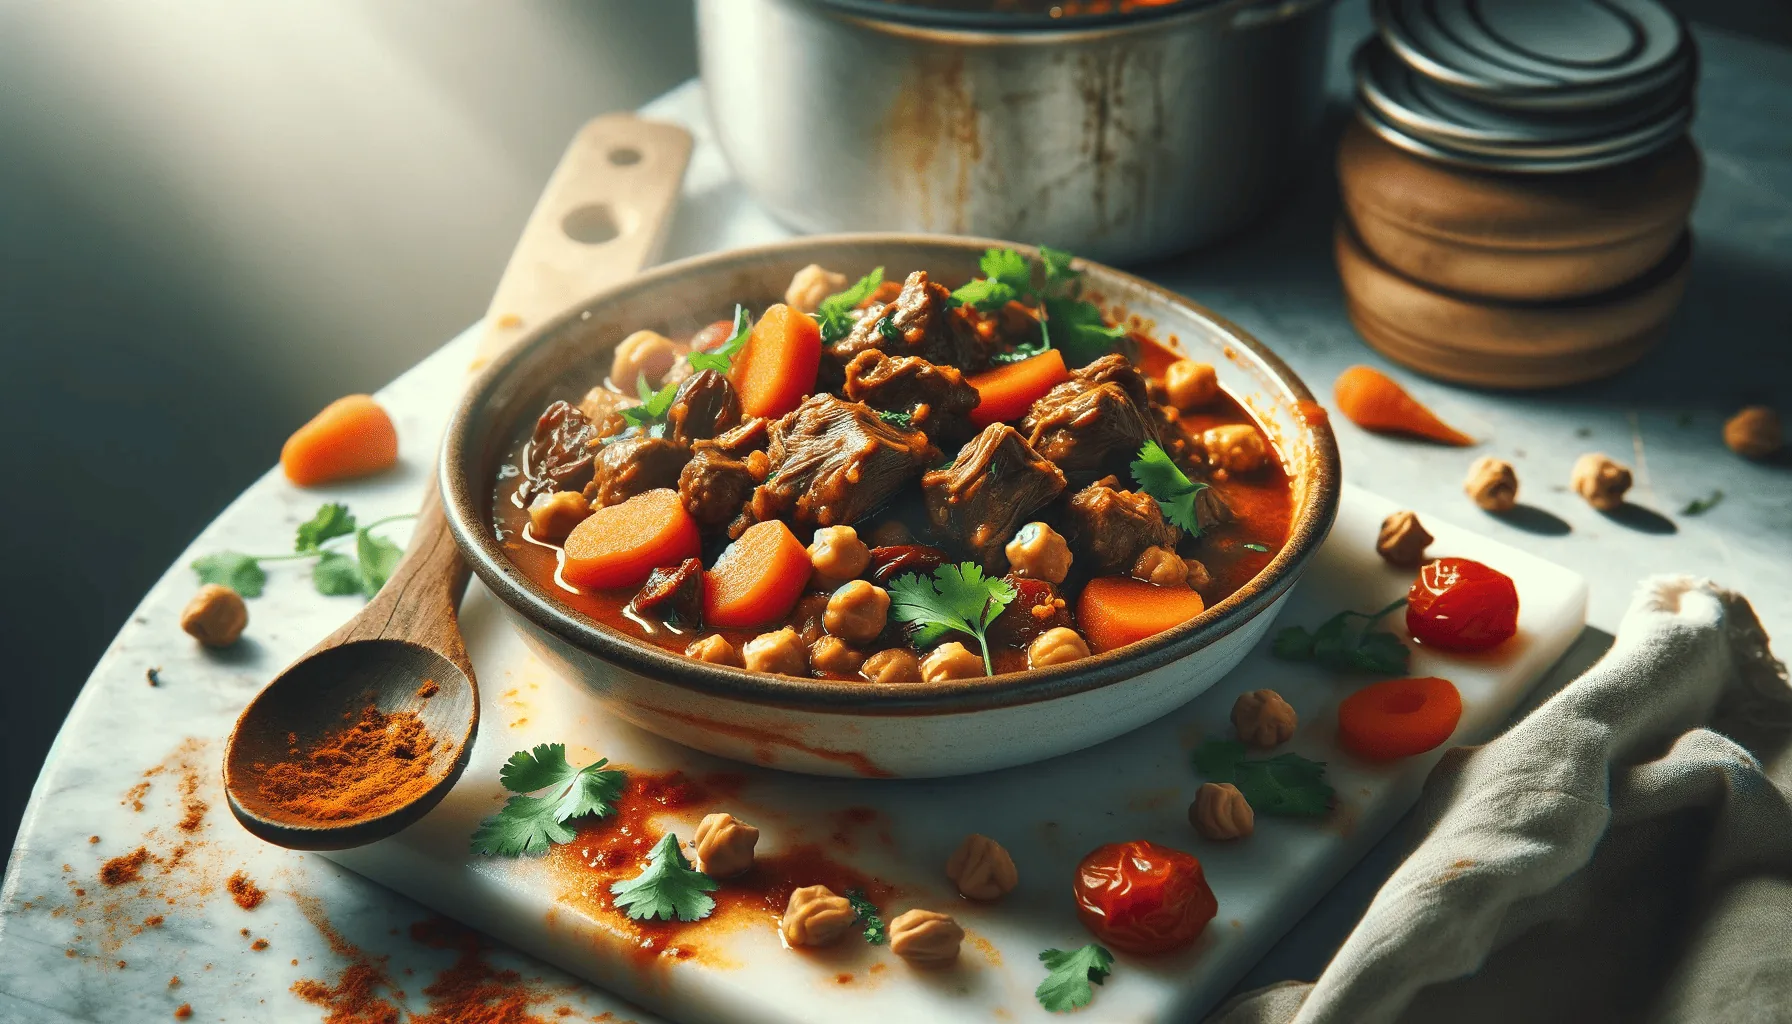 Arabian spiced camel stew, ready to serve in a serving bowl, garnished with cilantro, surrounded by used kitchen utensils and a rustic cutting board.